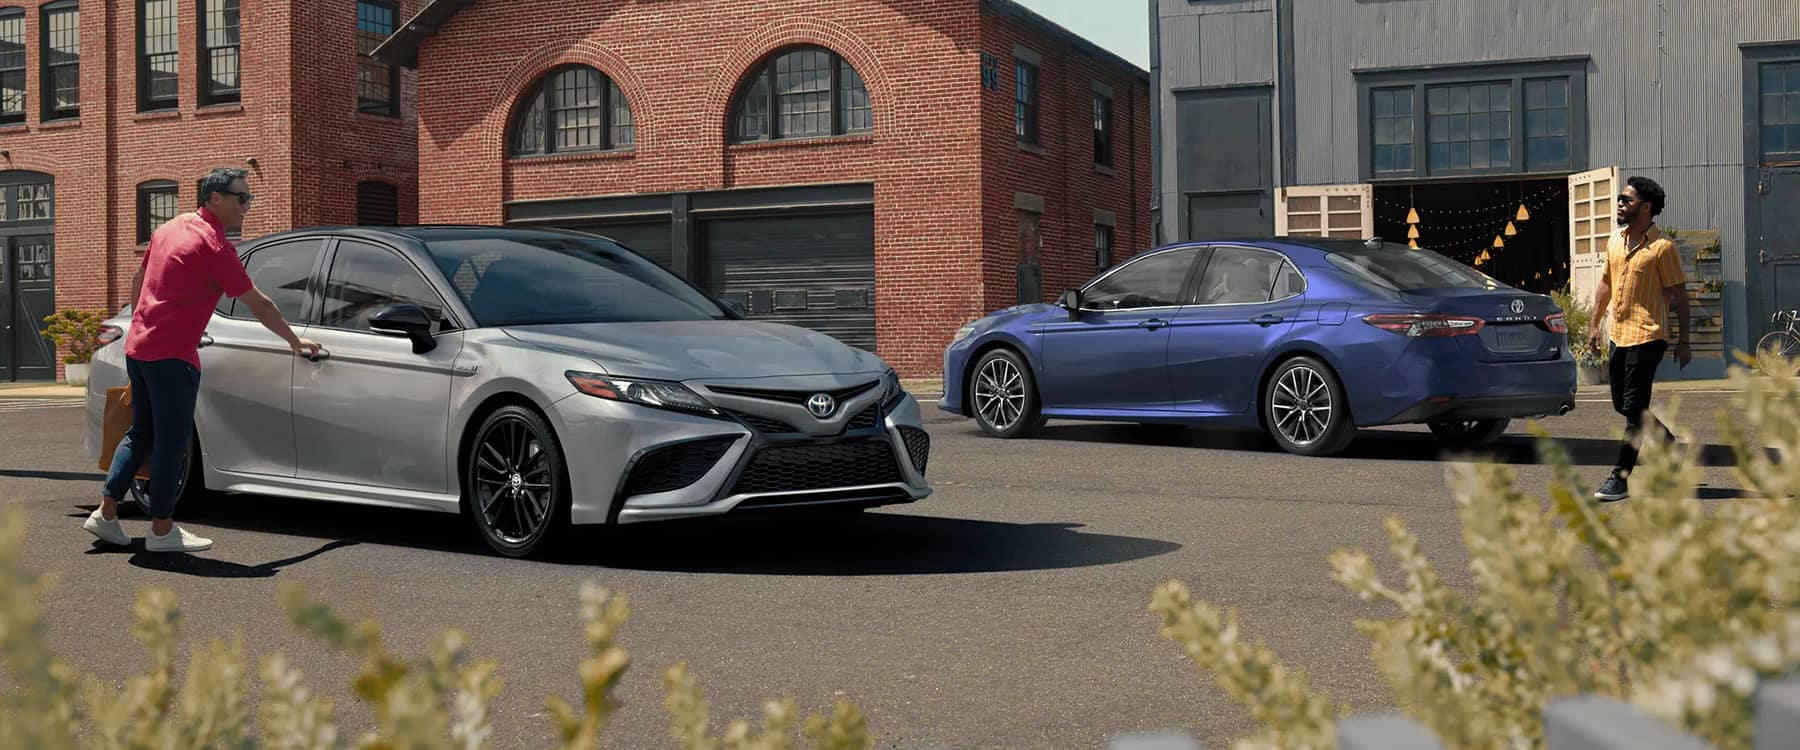 Two 2021 Toyota Camrys parked